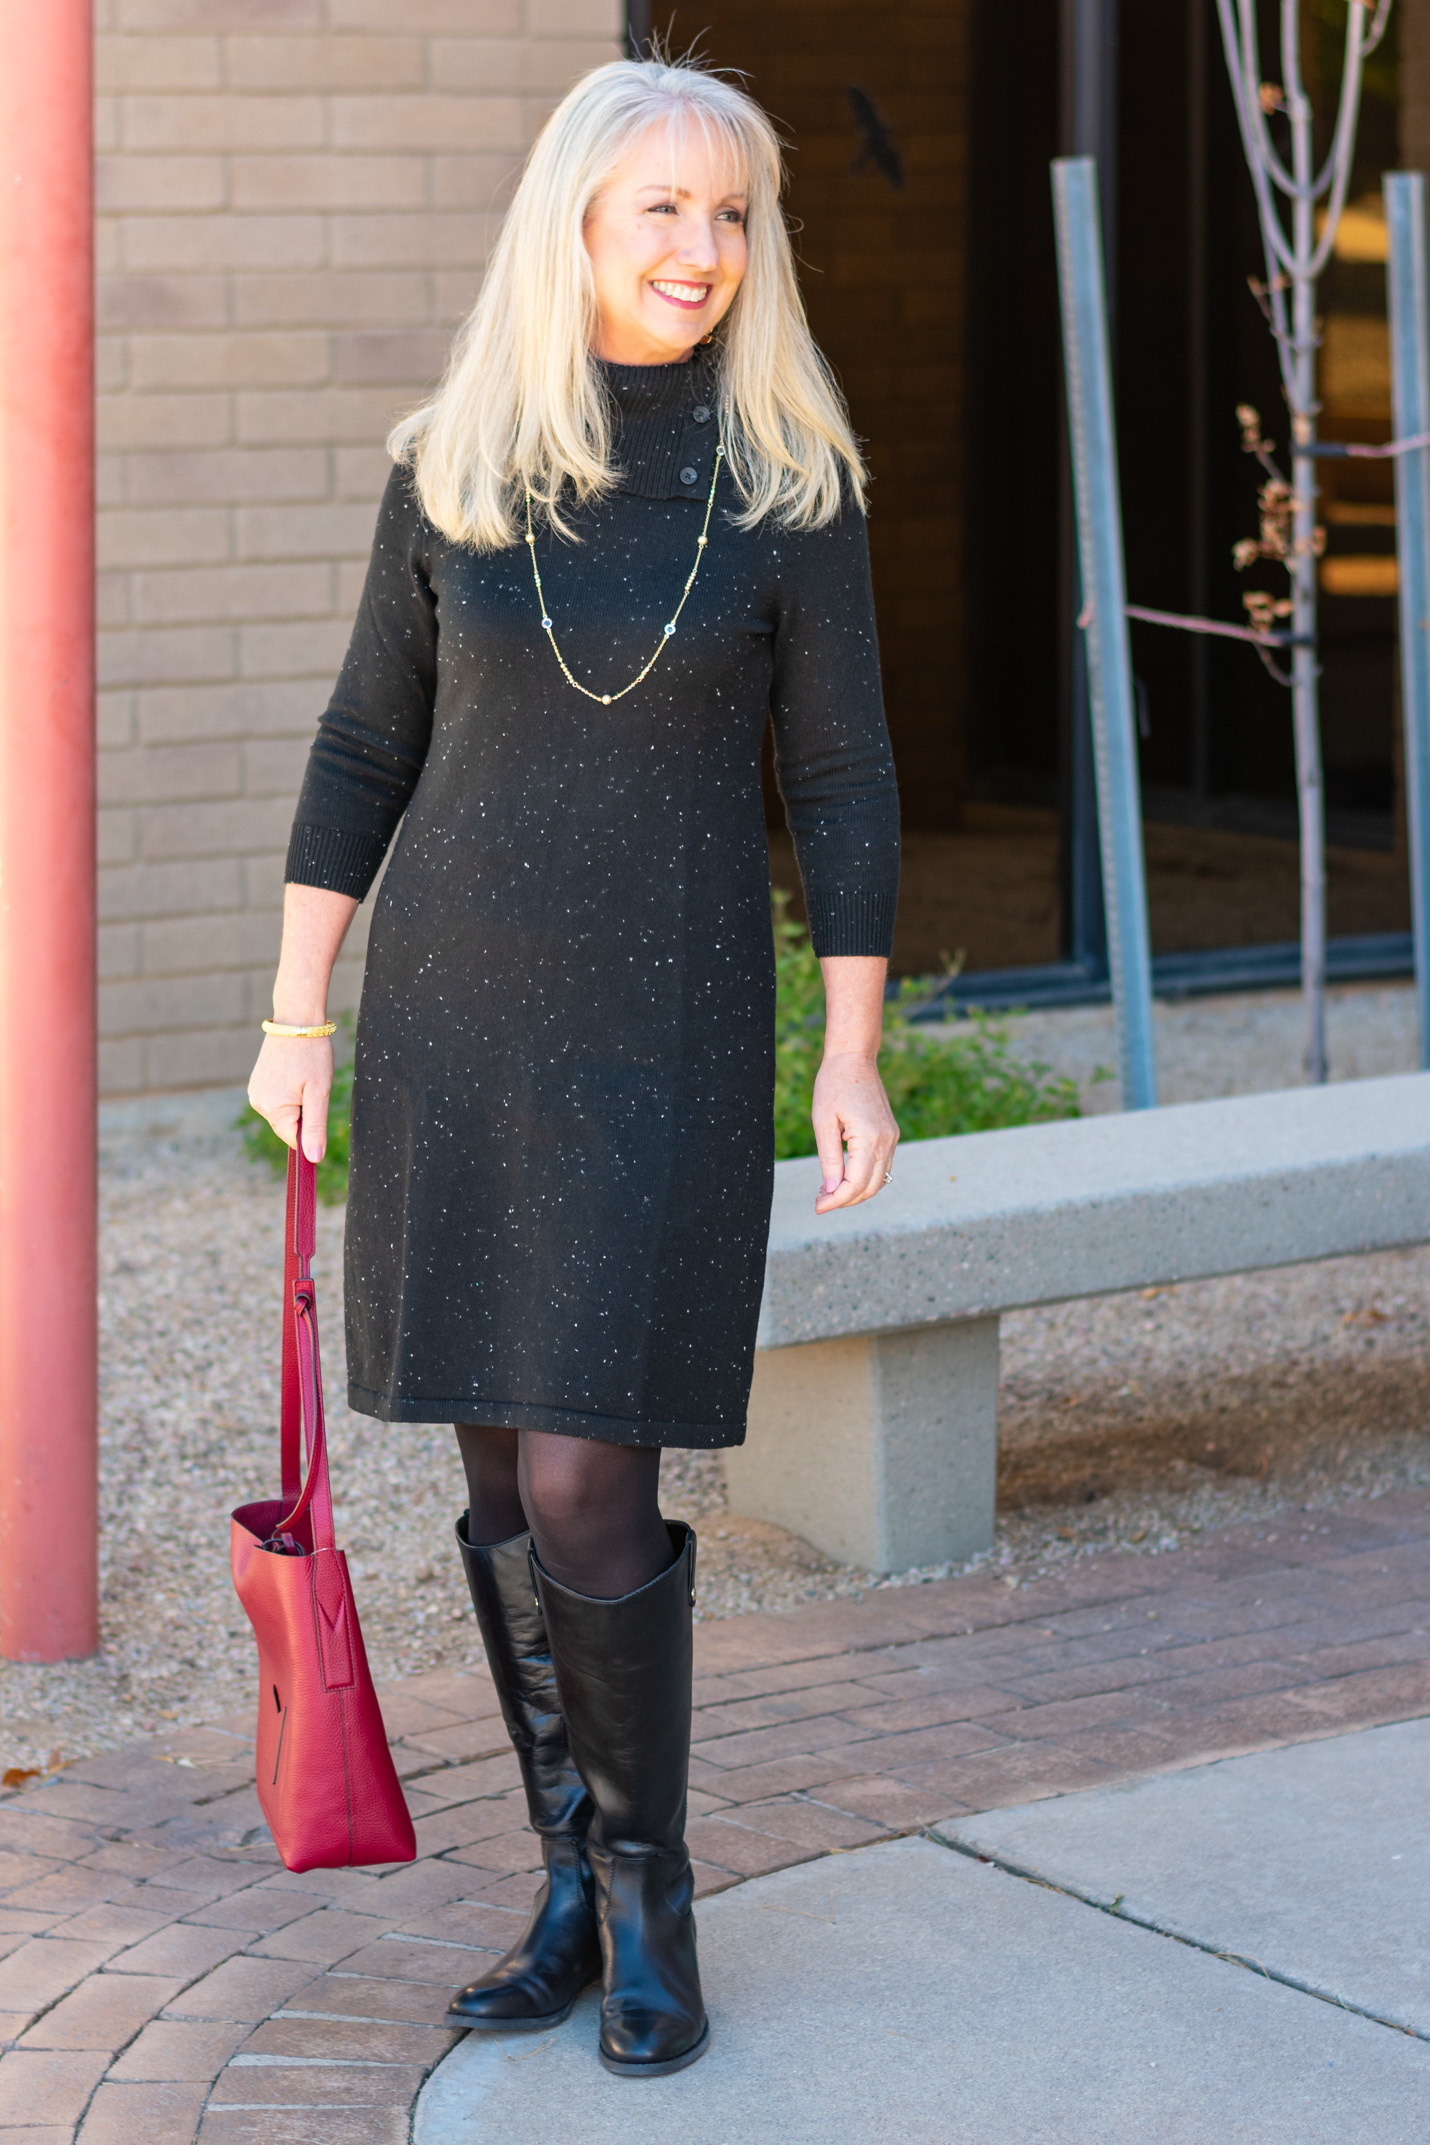 Donegal Sweater Dress with Riding Boots